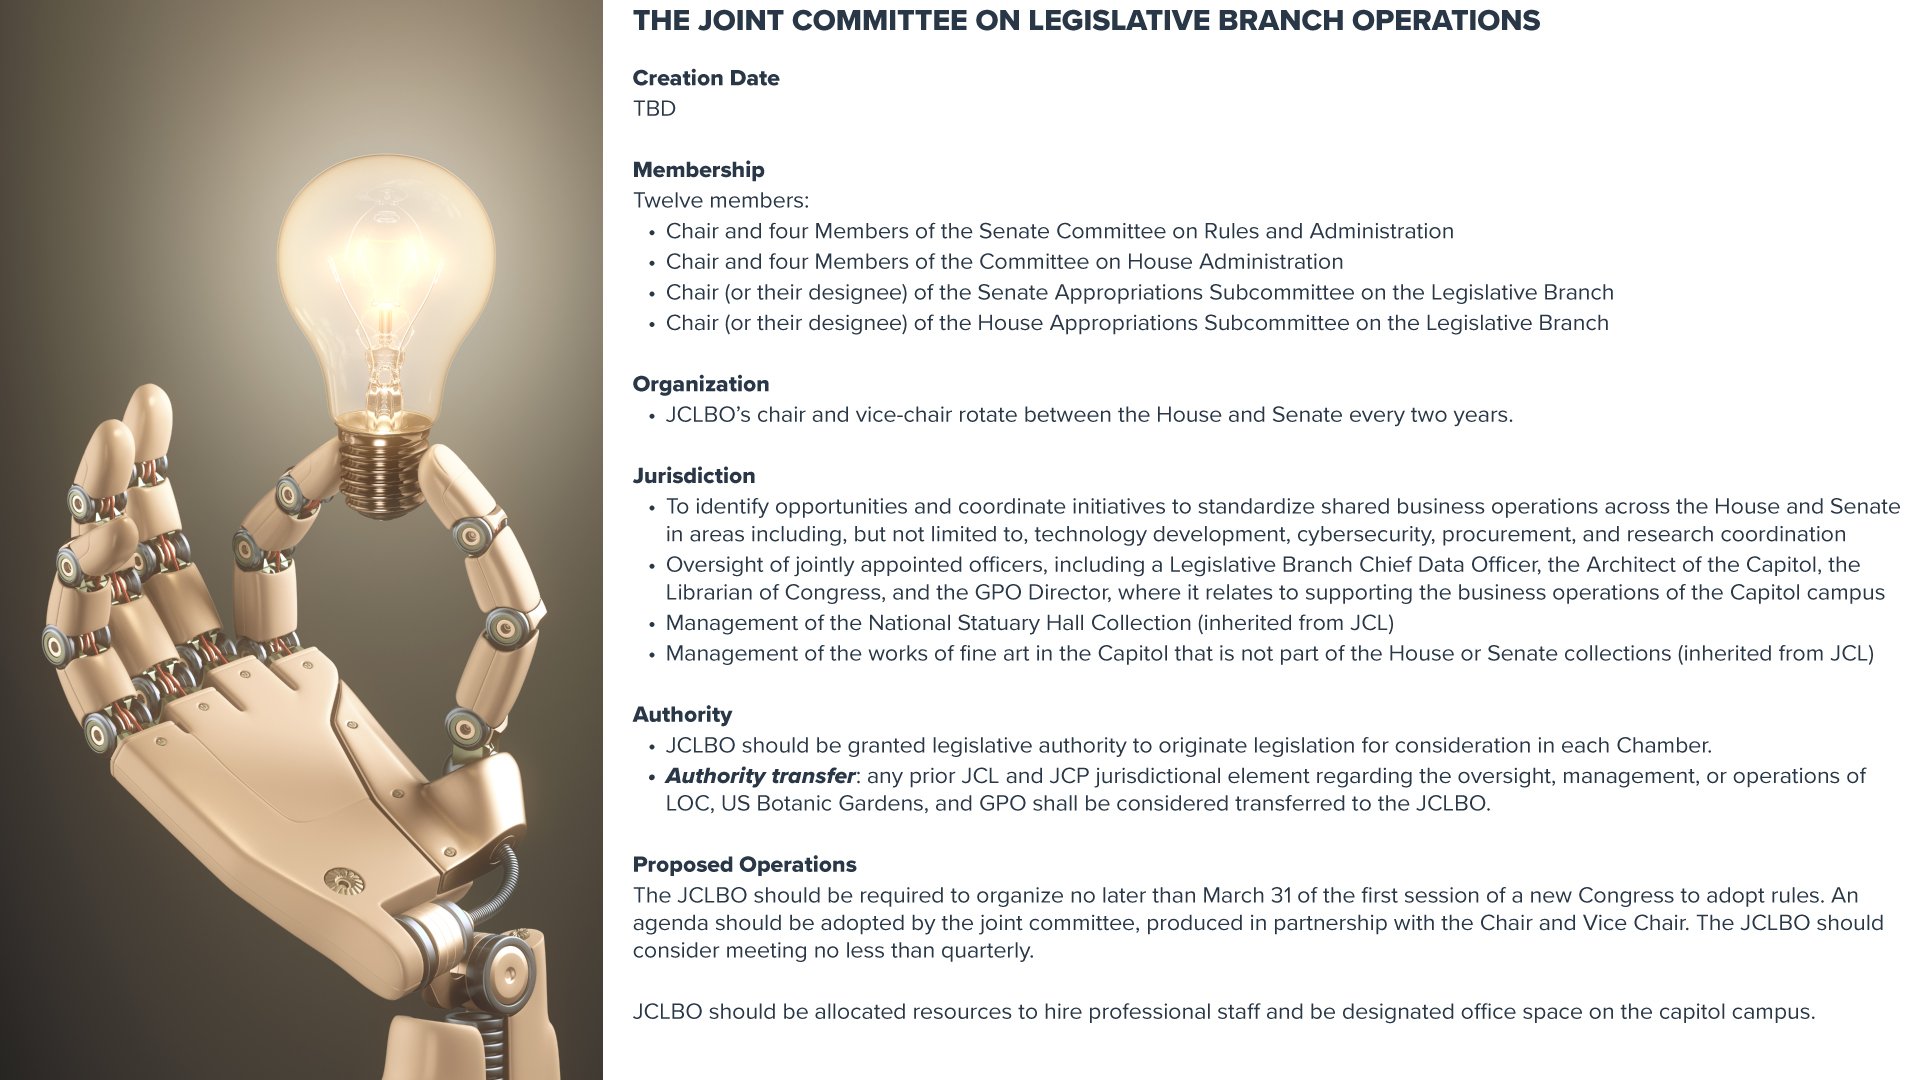 The-Joint-Committee-on-Legislative-Branch-Operations.jpg